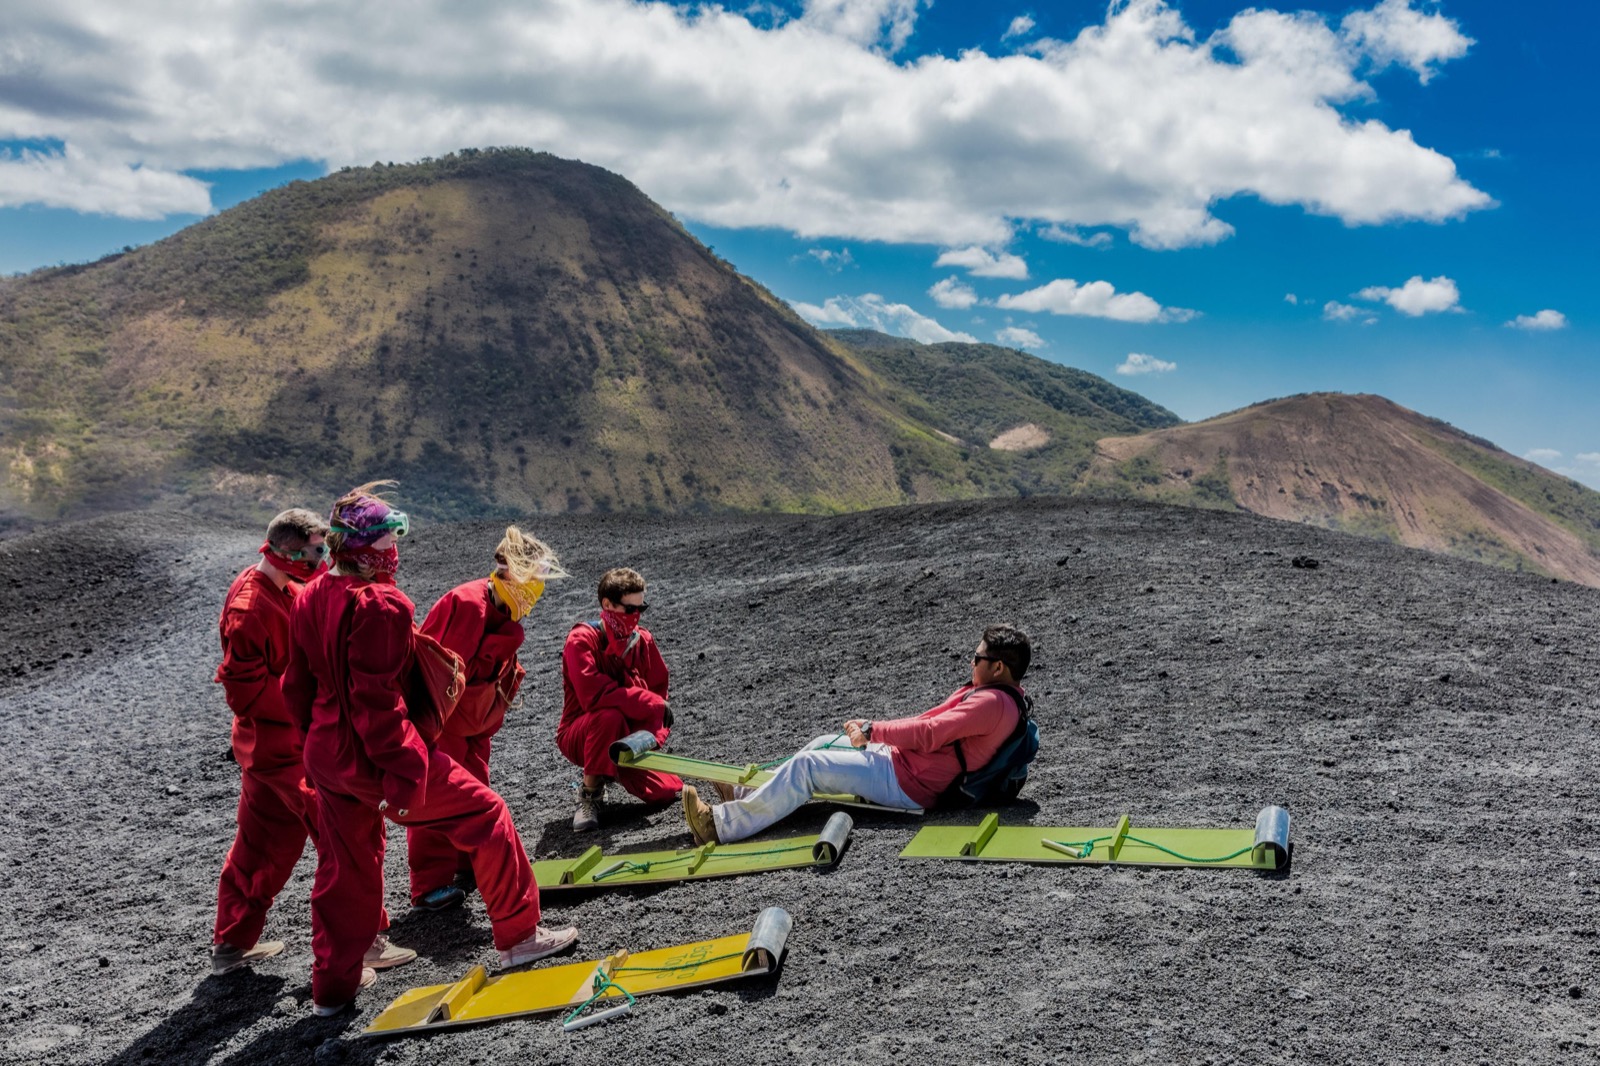 We Know How Brave You Are Based on the Adventurous Activities You Are Willing to Take Part in Go “volcano boarding” on Cerro Negro, Nicaragua